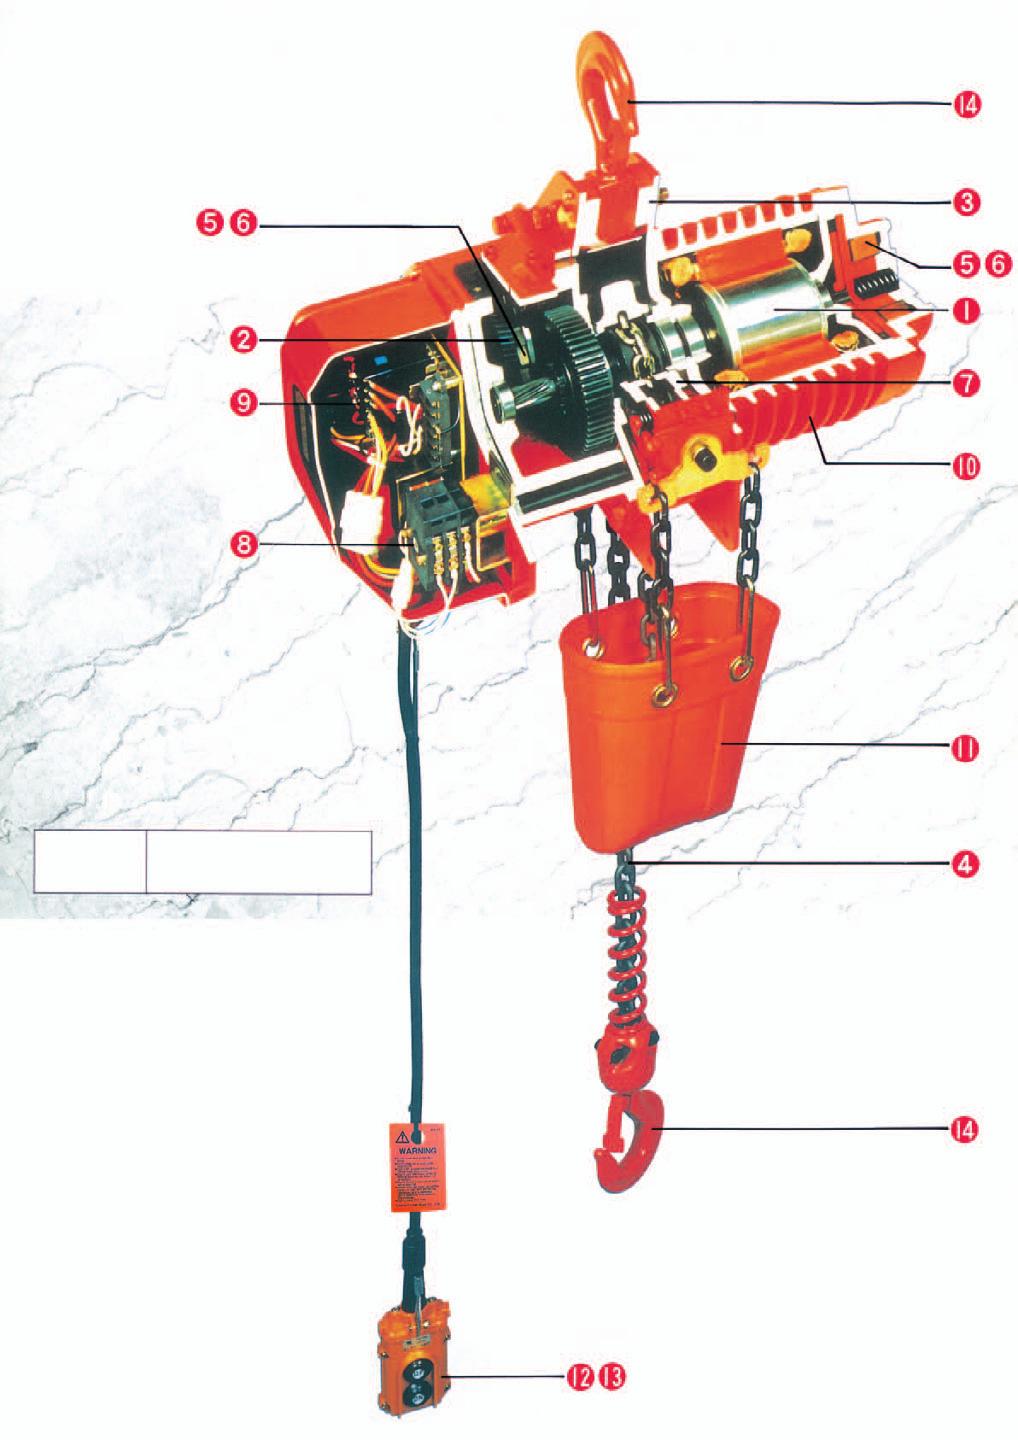 THE DA/DB SERIES DOUBLE BRAKE ELECTRIC CHAIN HOIST IS DESIGNED WITH OUR UNIQUE AND TRUSTABLE TECHNIQUES.